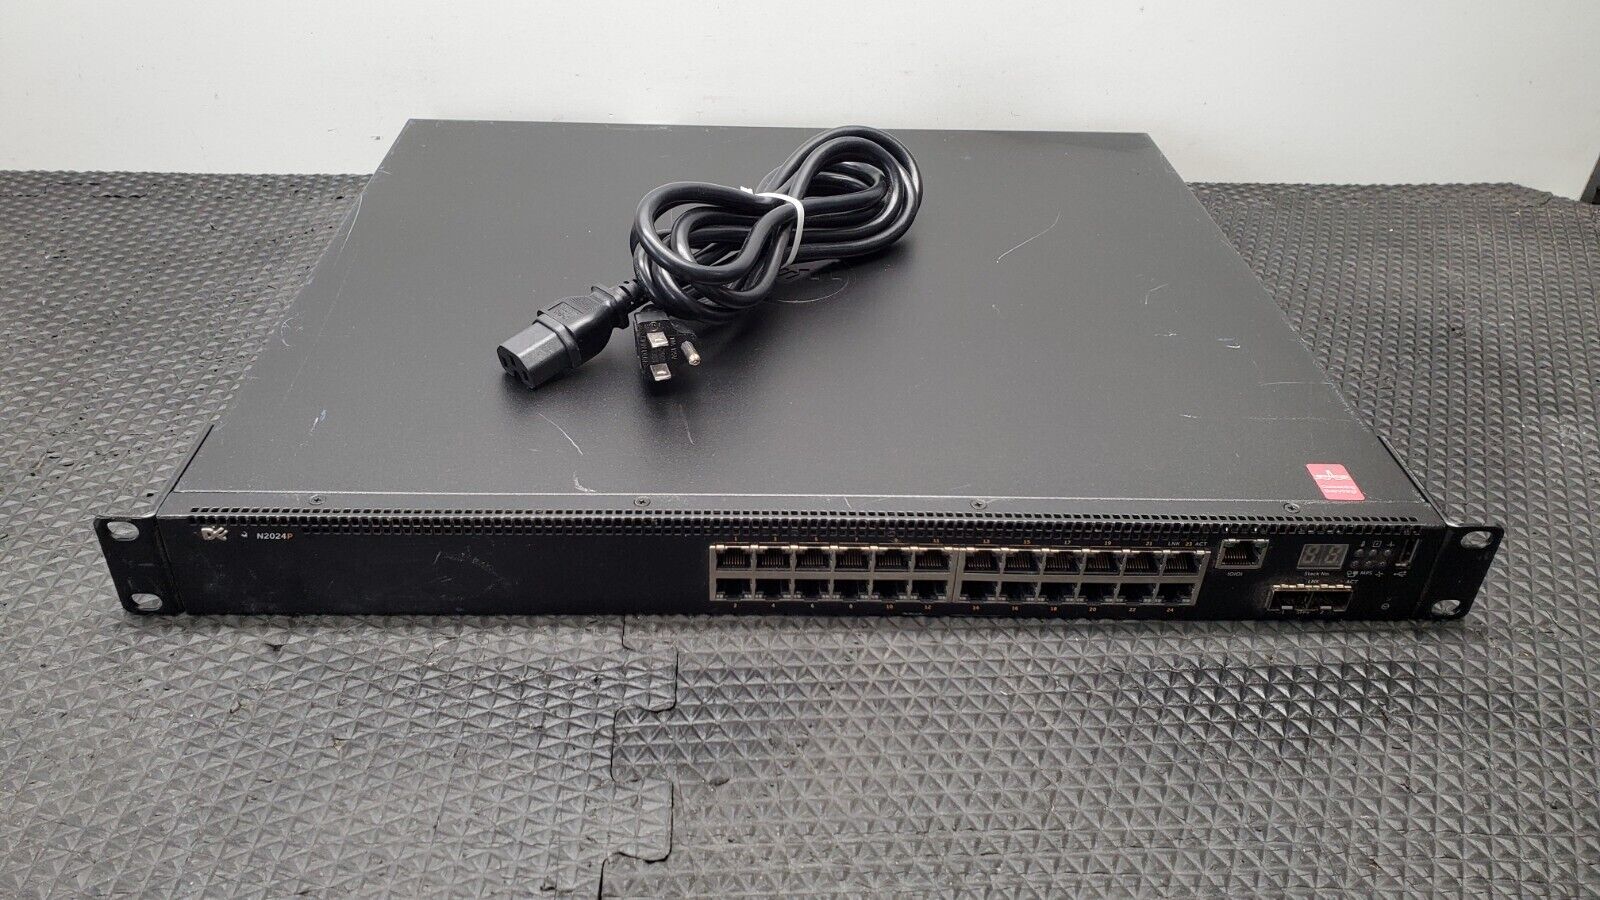 Dell Networking N2024P 24-Port 1GbE PoE+ RJ45 Network Switch TESTED RESET